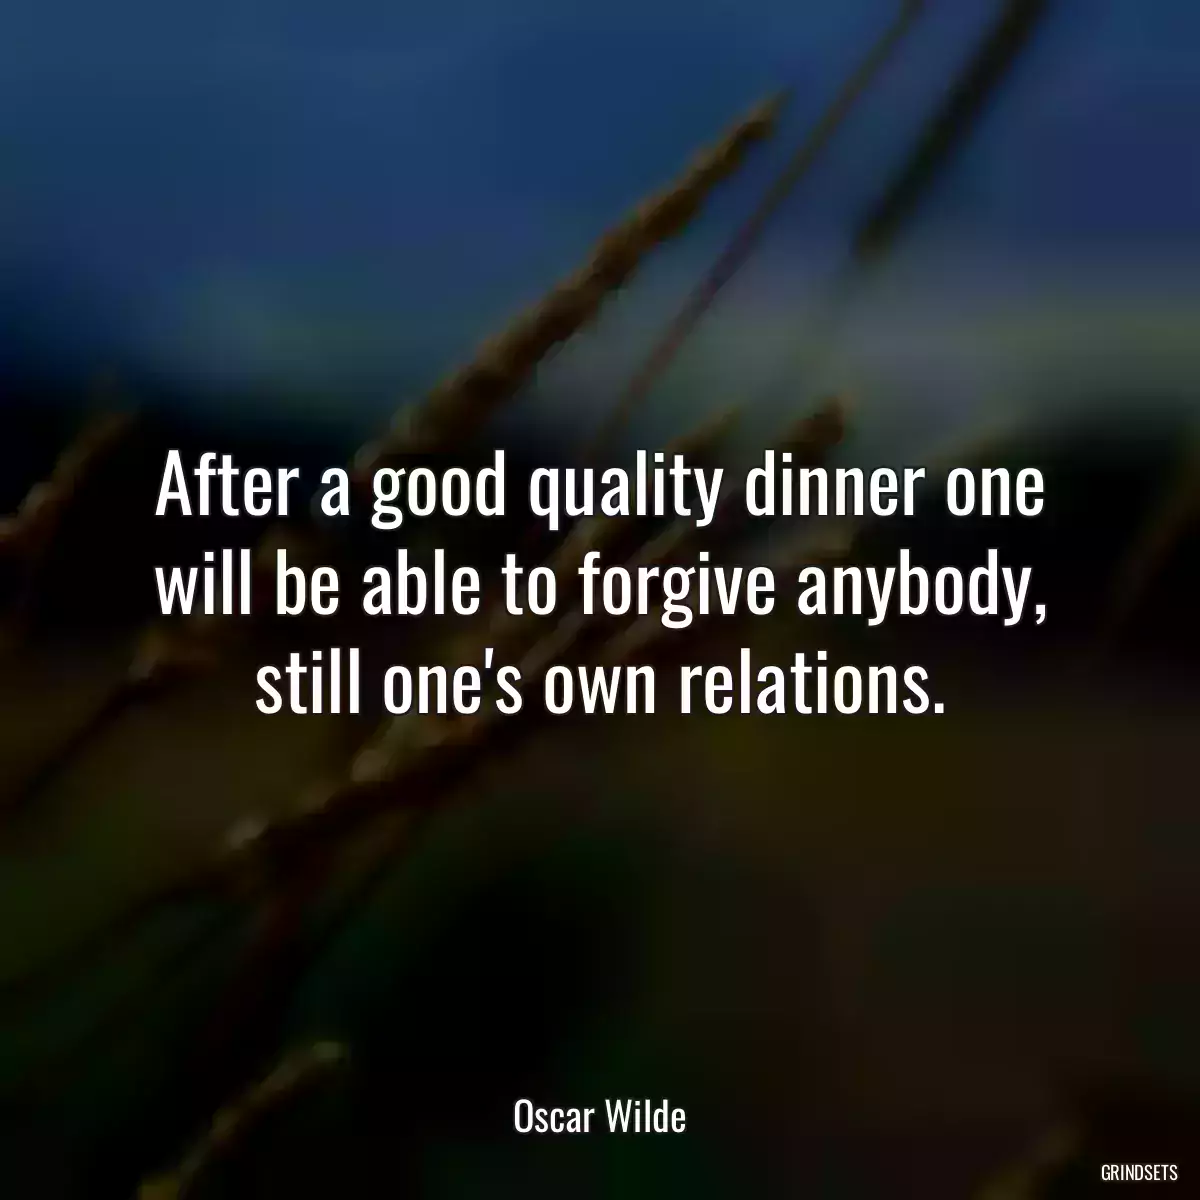 After a good quality dinner one will be able to forgive anybody, still one\'s own relations.